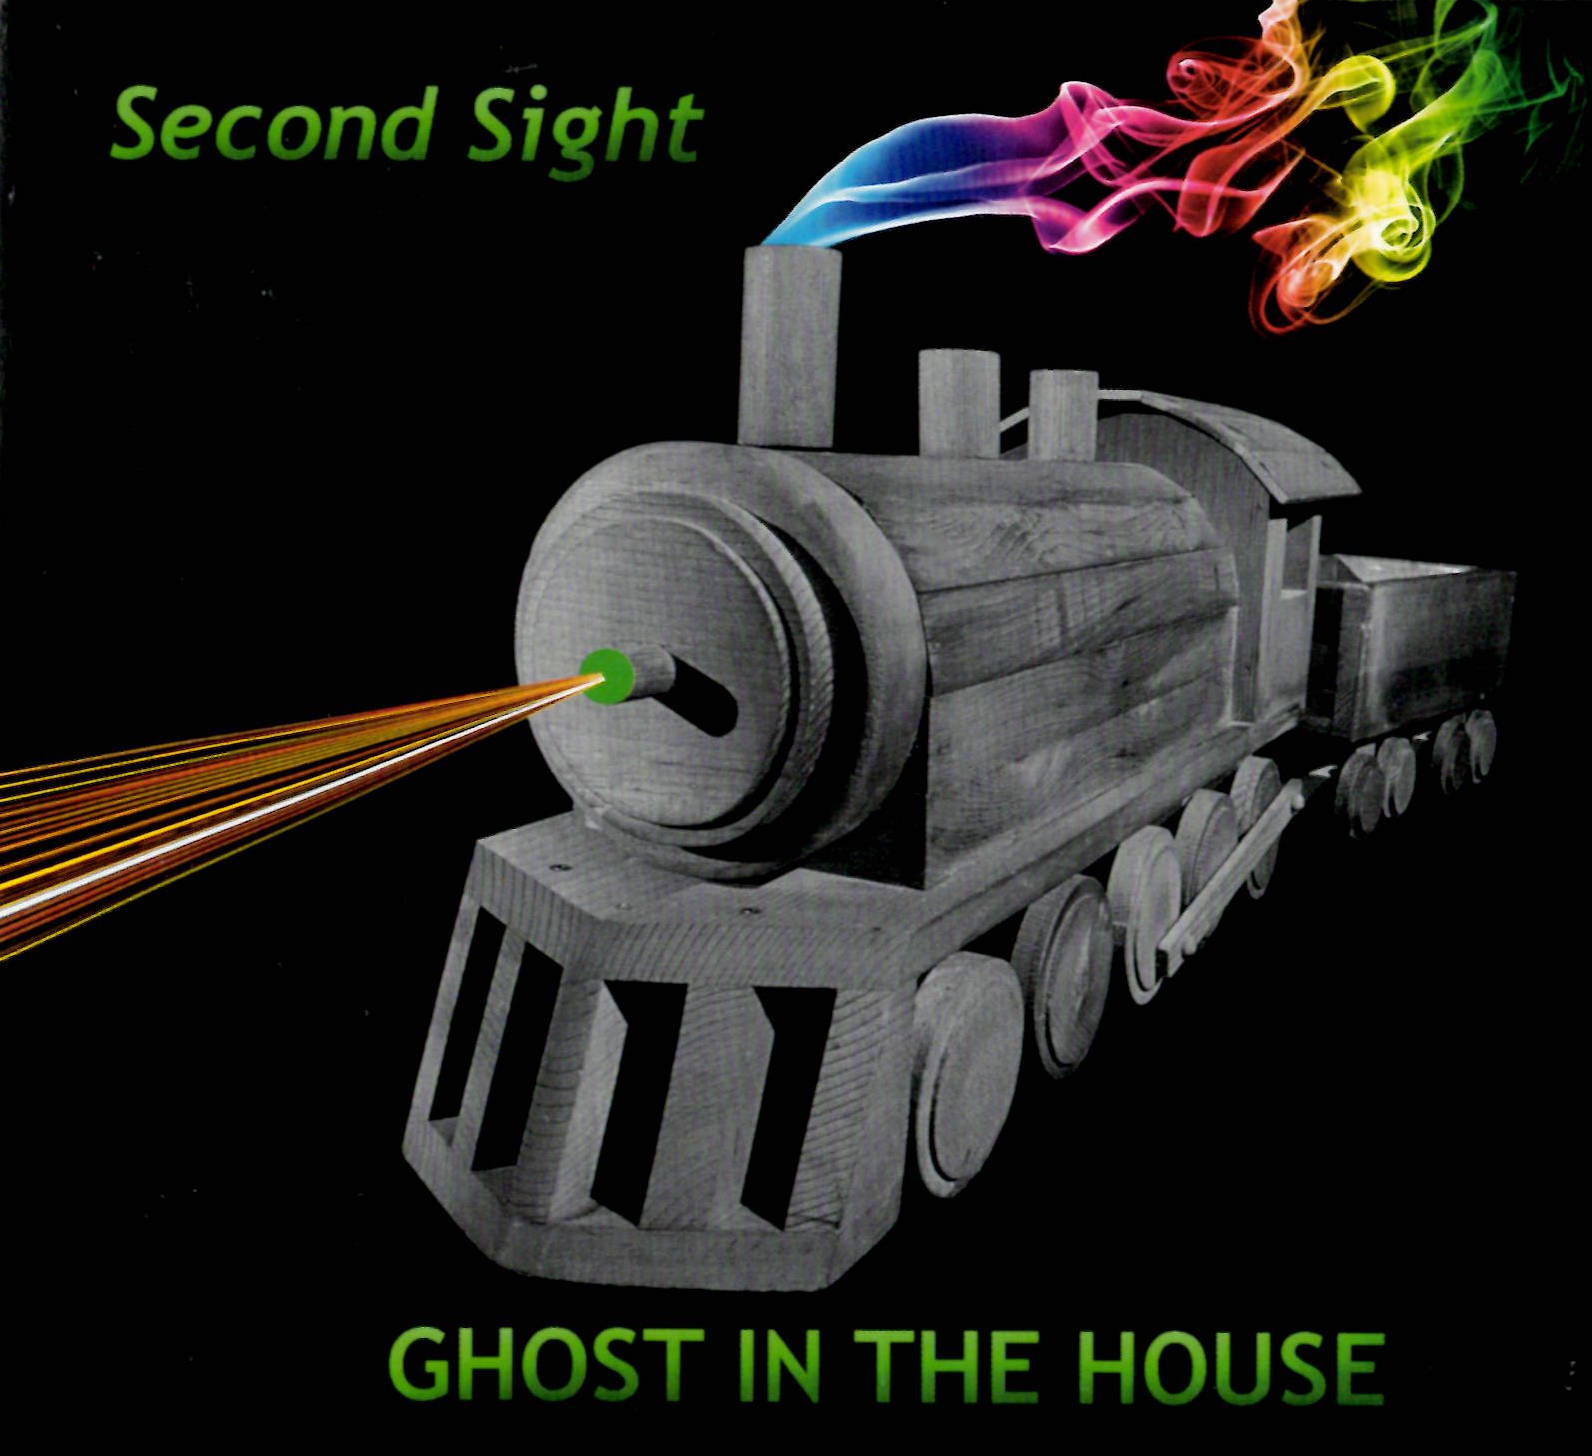 Second Sight Ghost in the House